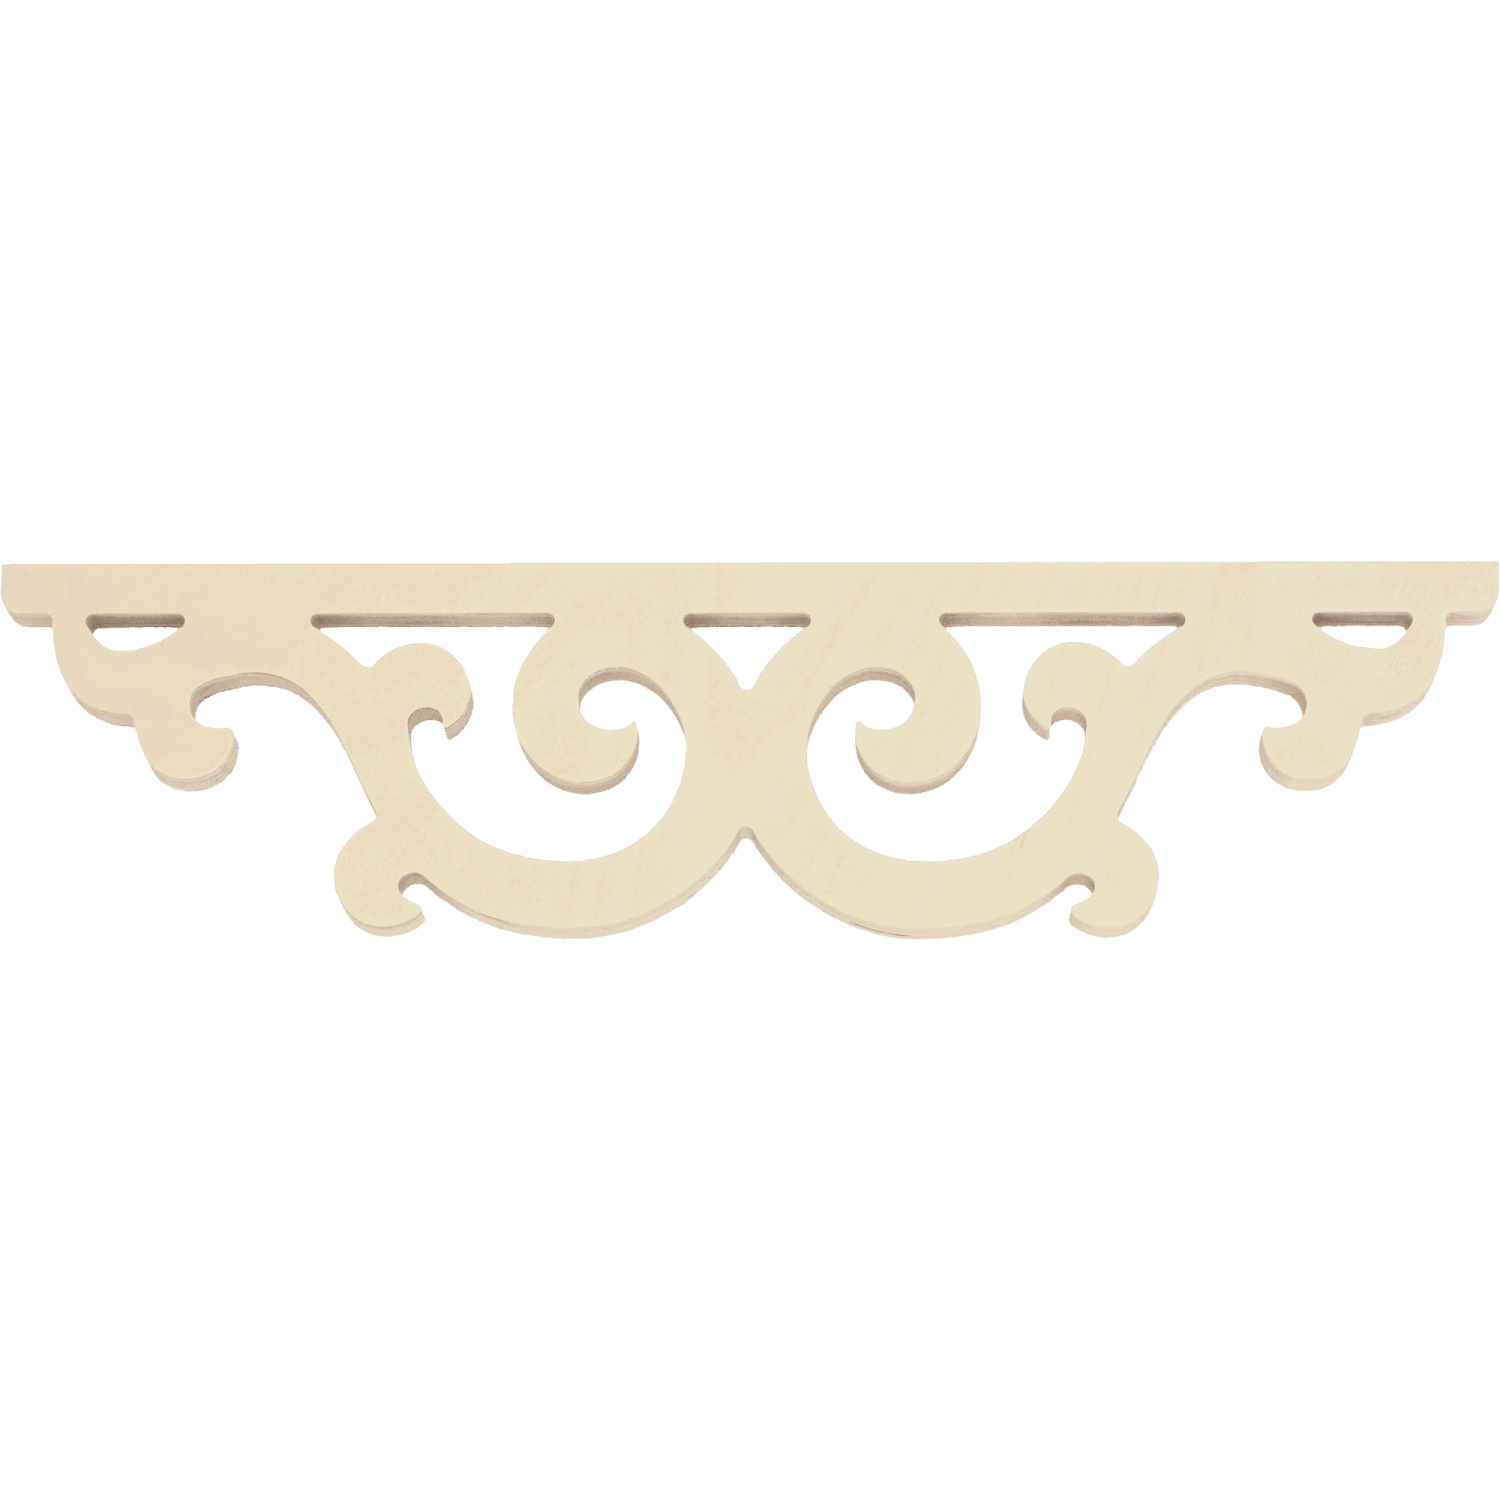 Middle bracket 001 - Classic wooden corbel & bracket buddy with ornaments for porch and veranda.